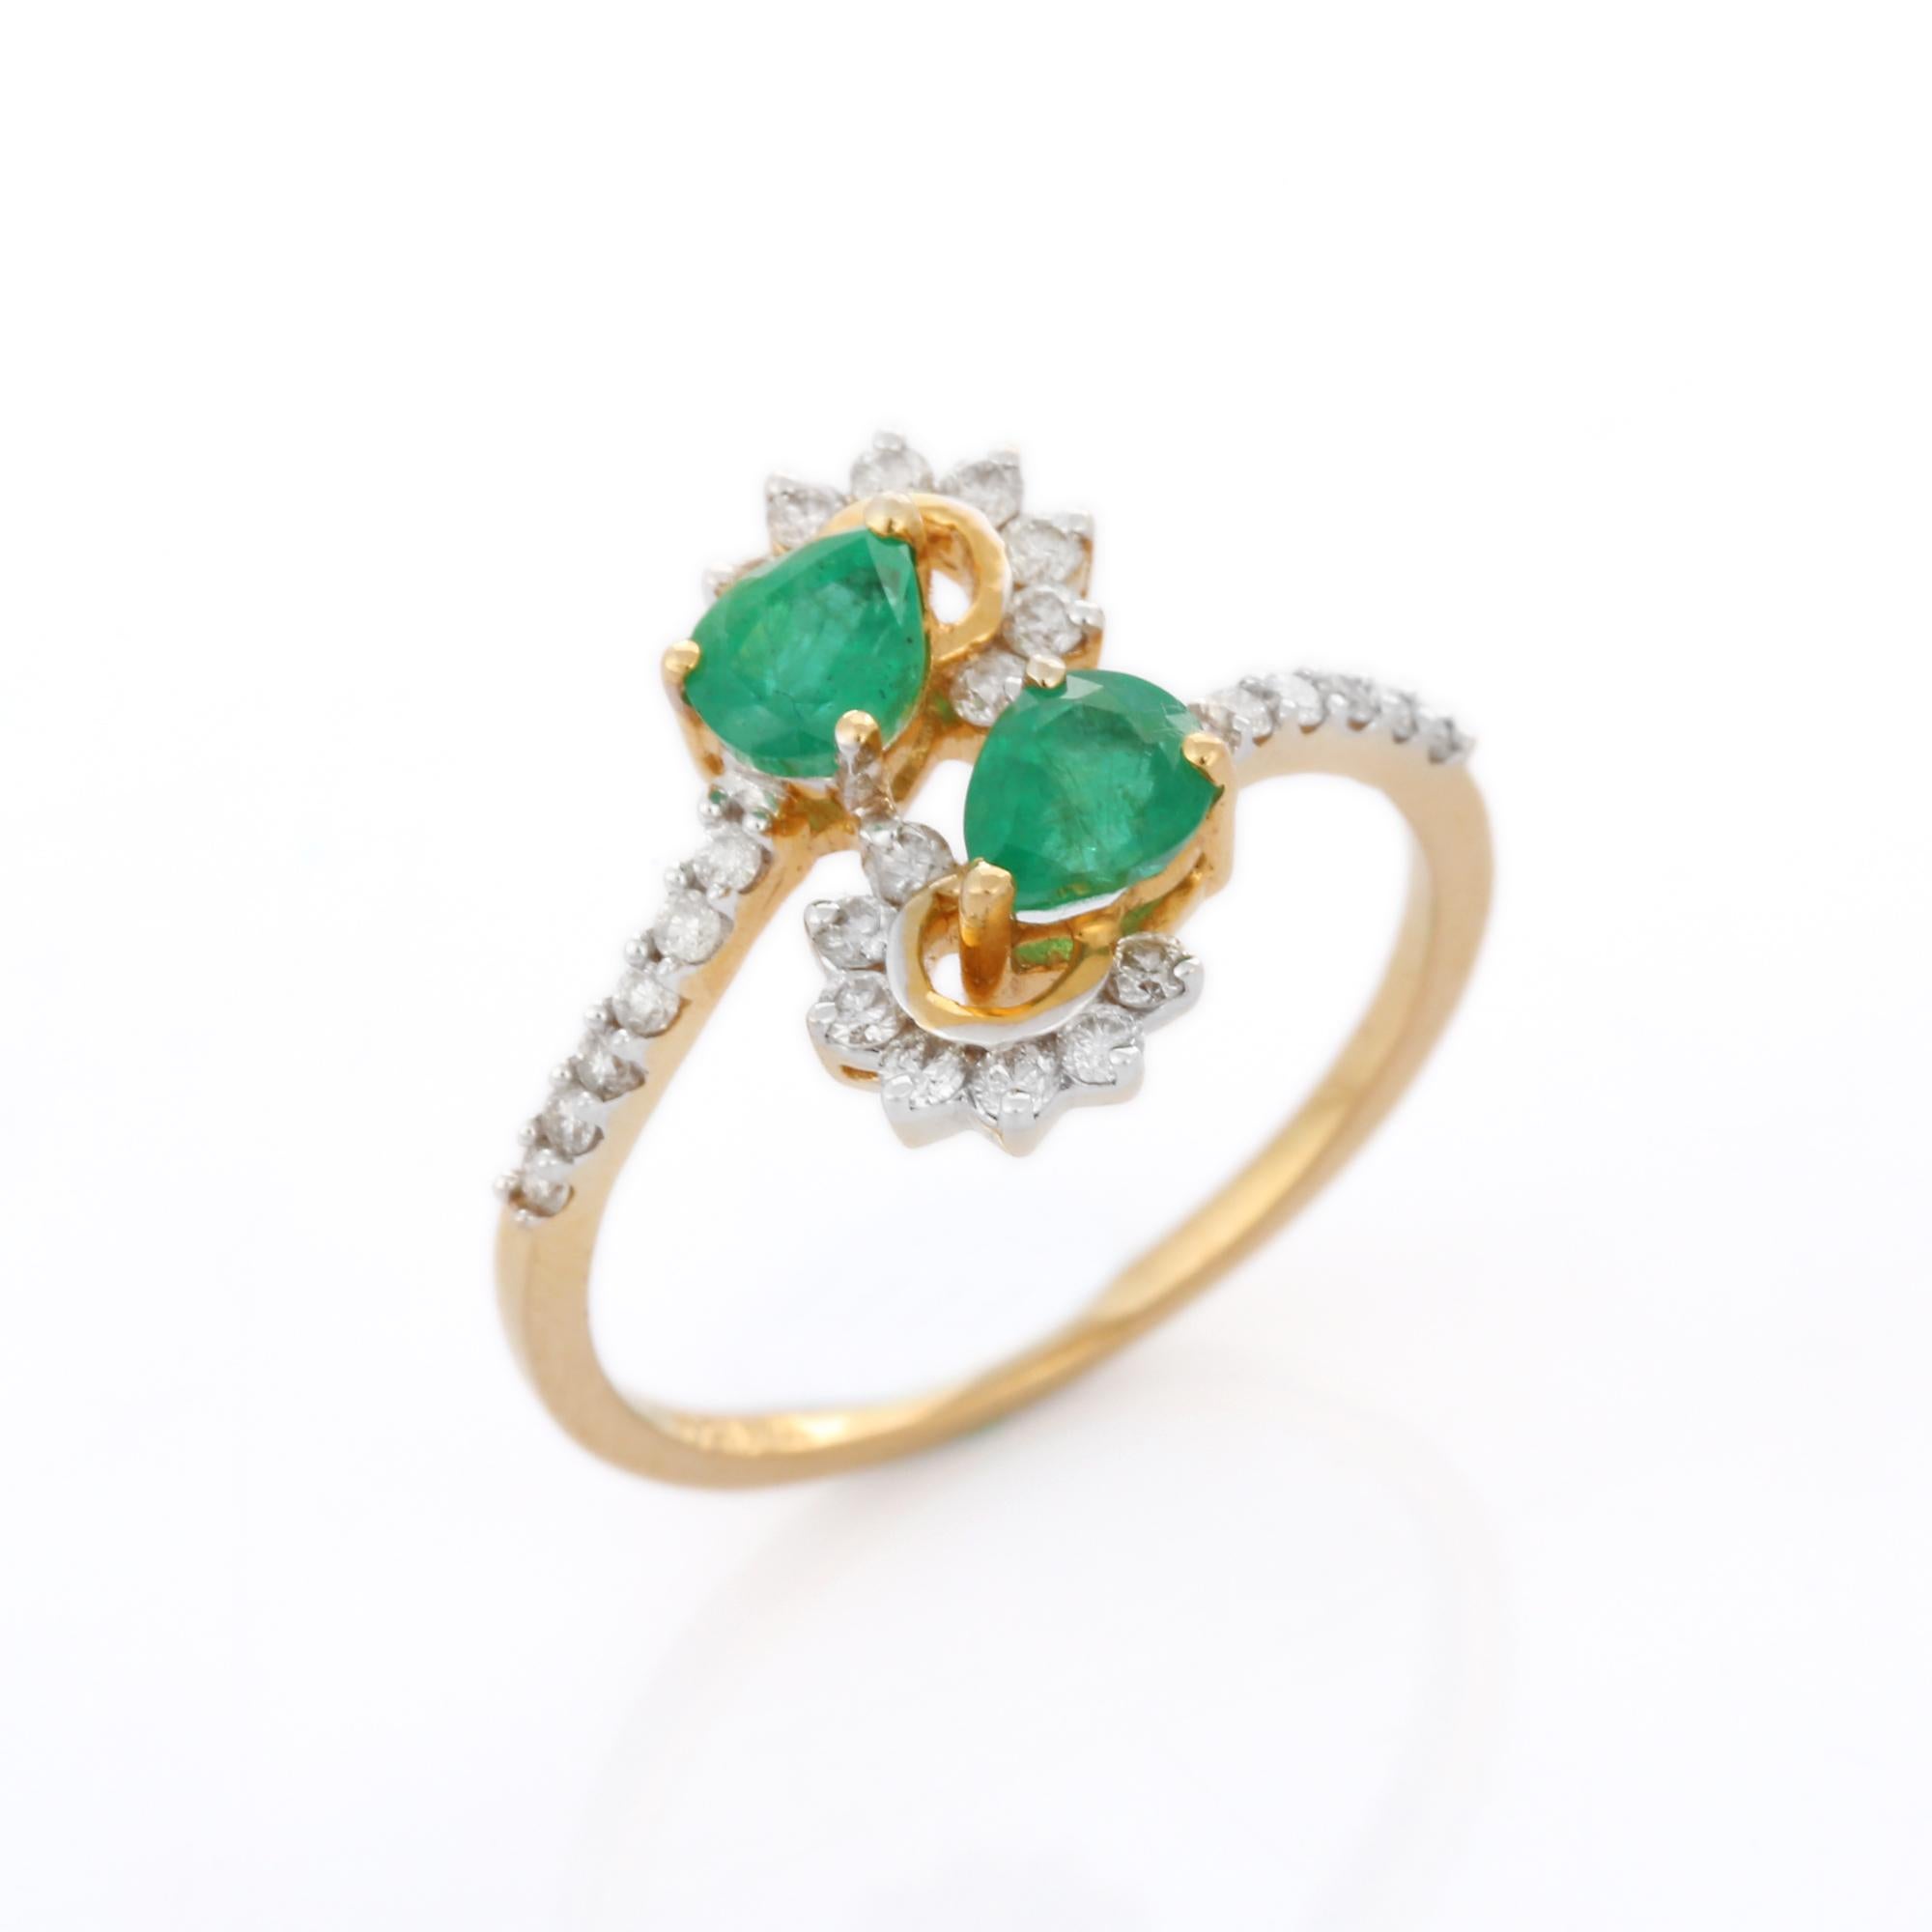 For Sale:  Exquisite Pear Cut Emerald and Diamond Open Ring in 18K Yellow Gold for Her 2